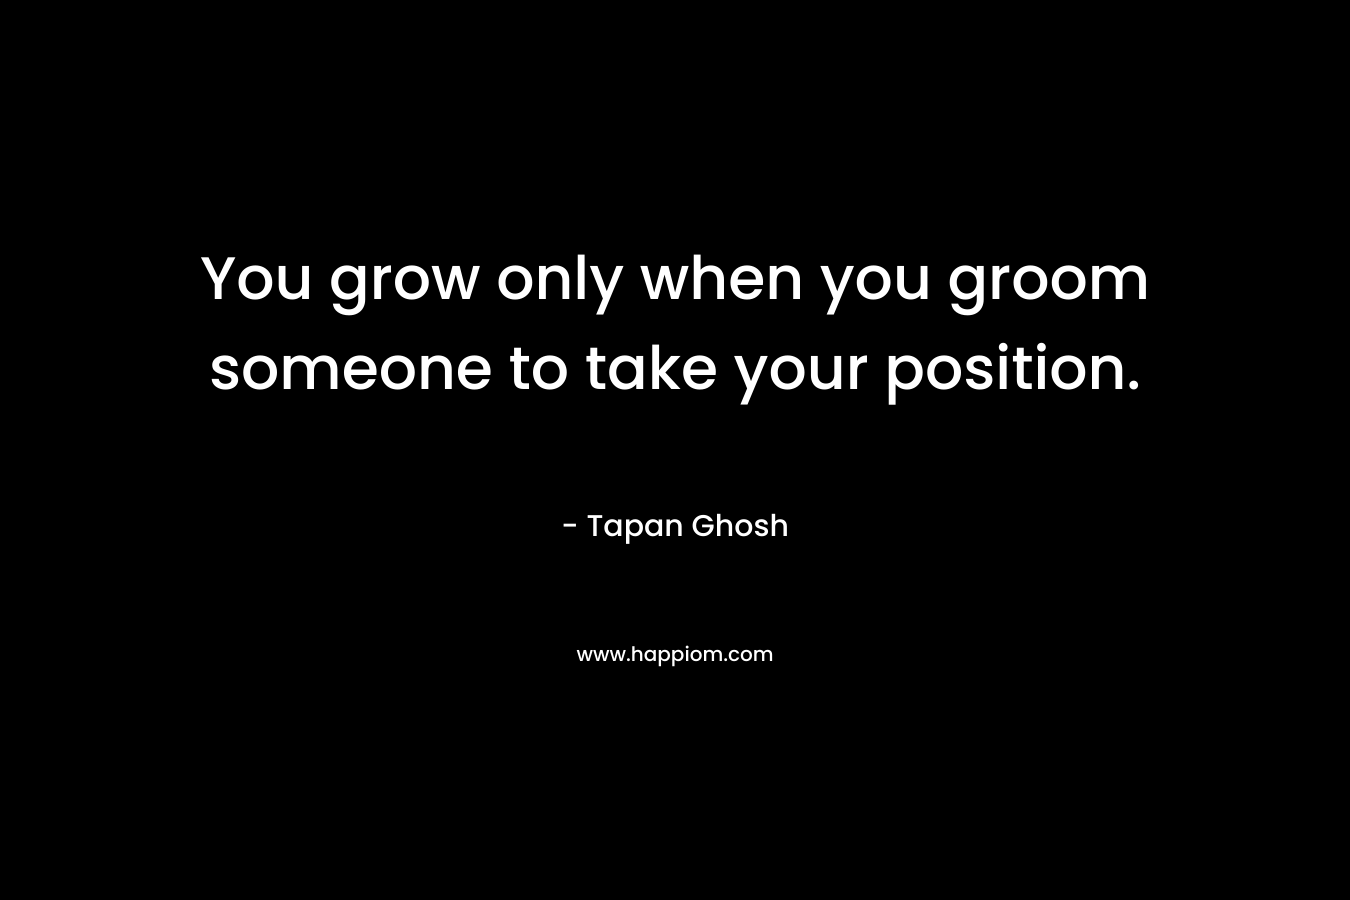 You grow only when you groom someone to take your position.